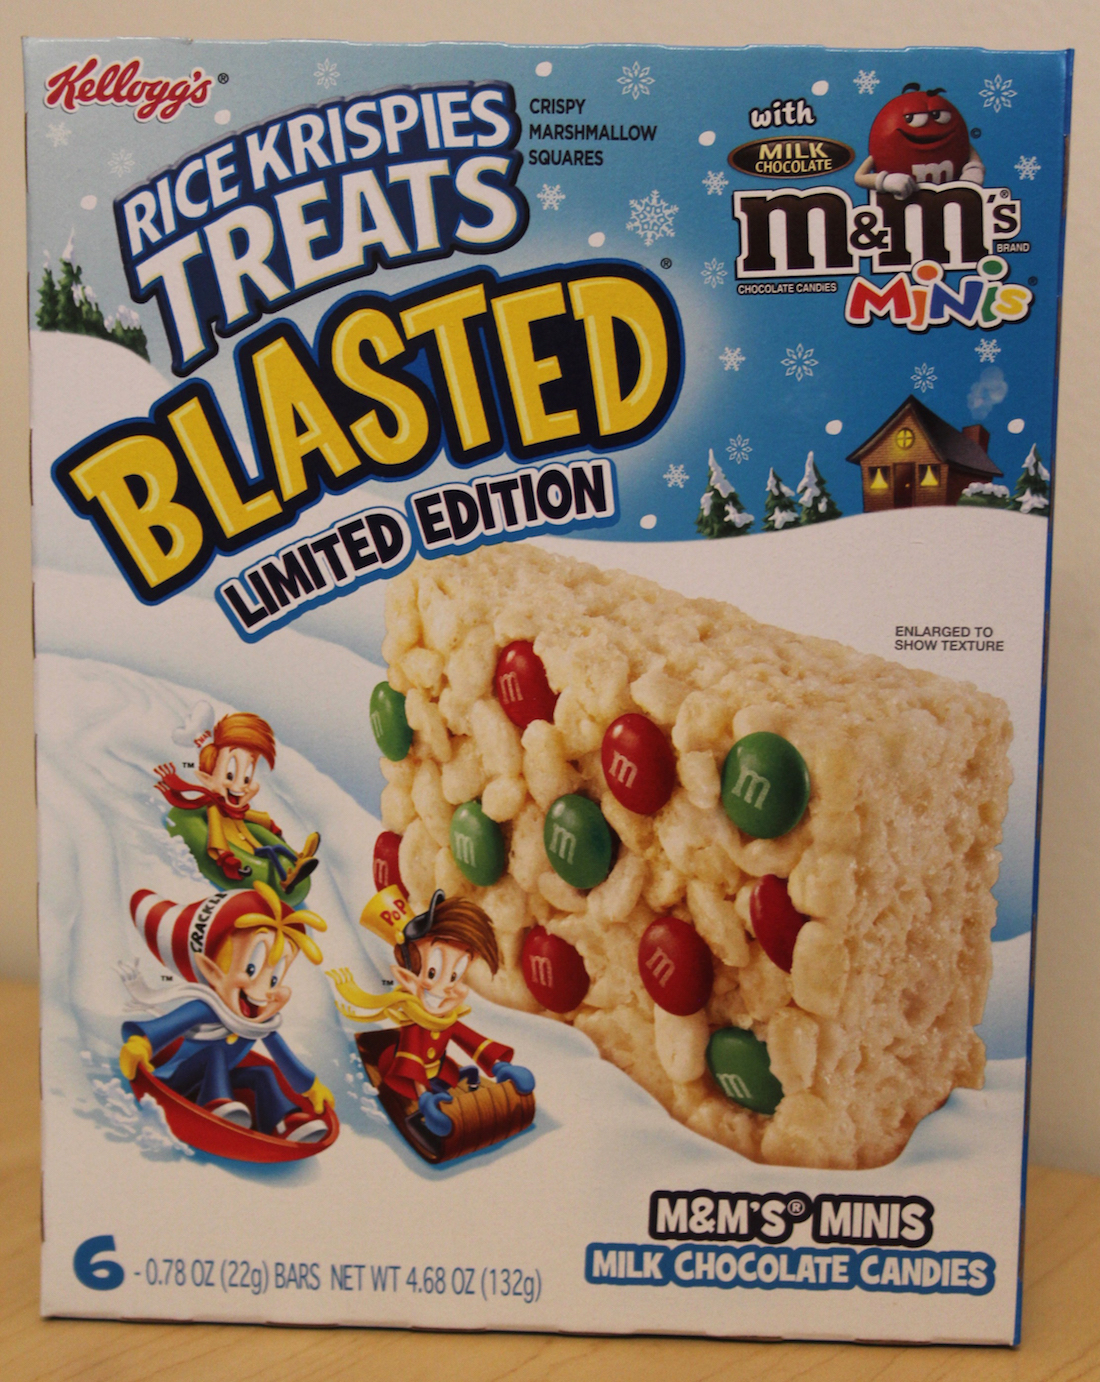 Review: Holiday Rice Krispies Treats Blasted with M&M’s Minis - Cerealously